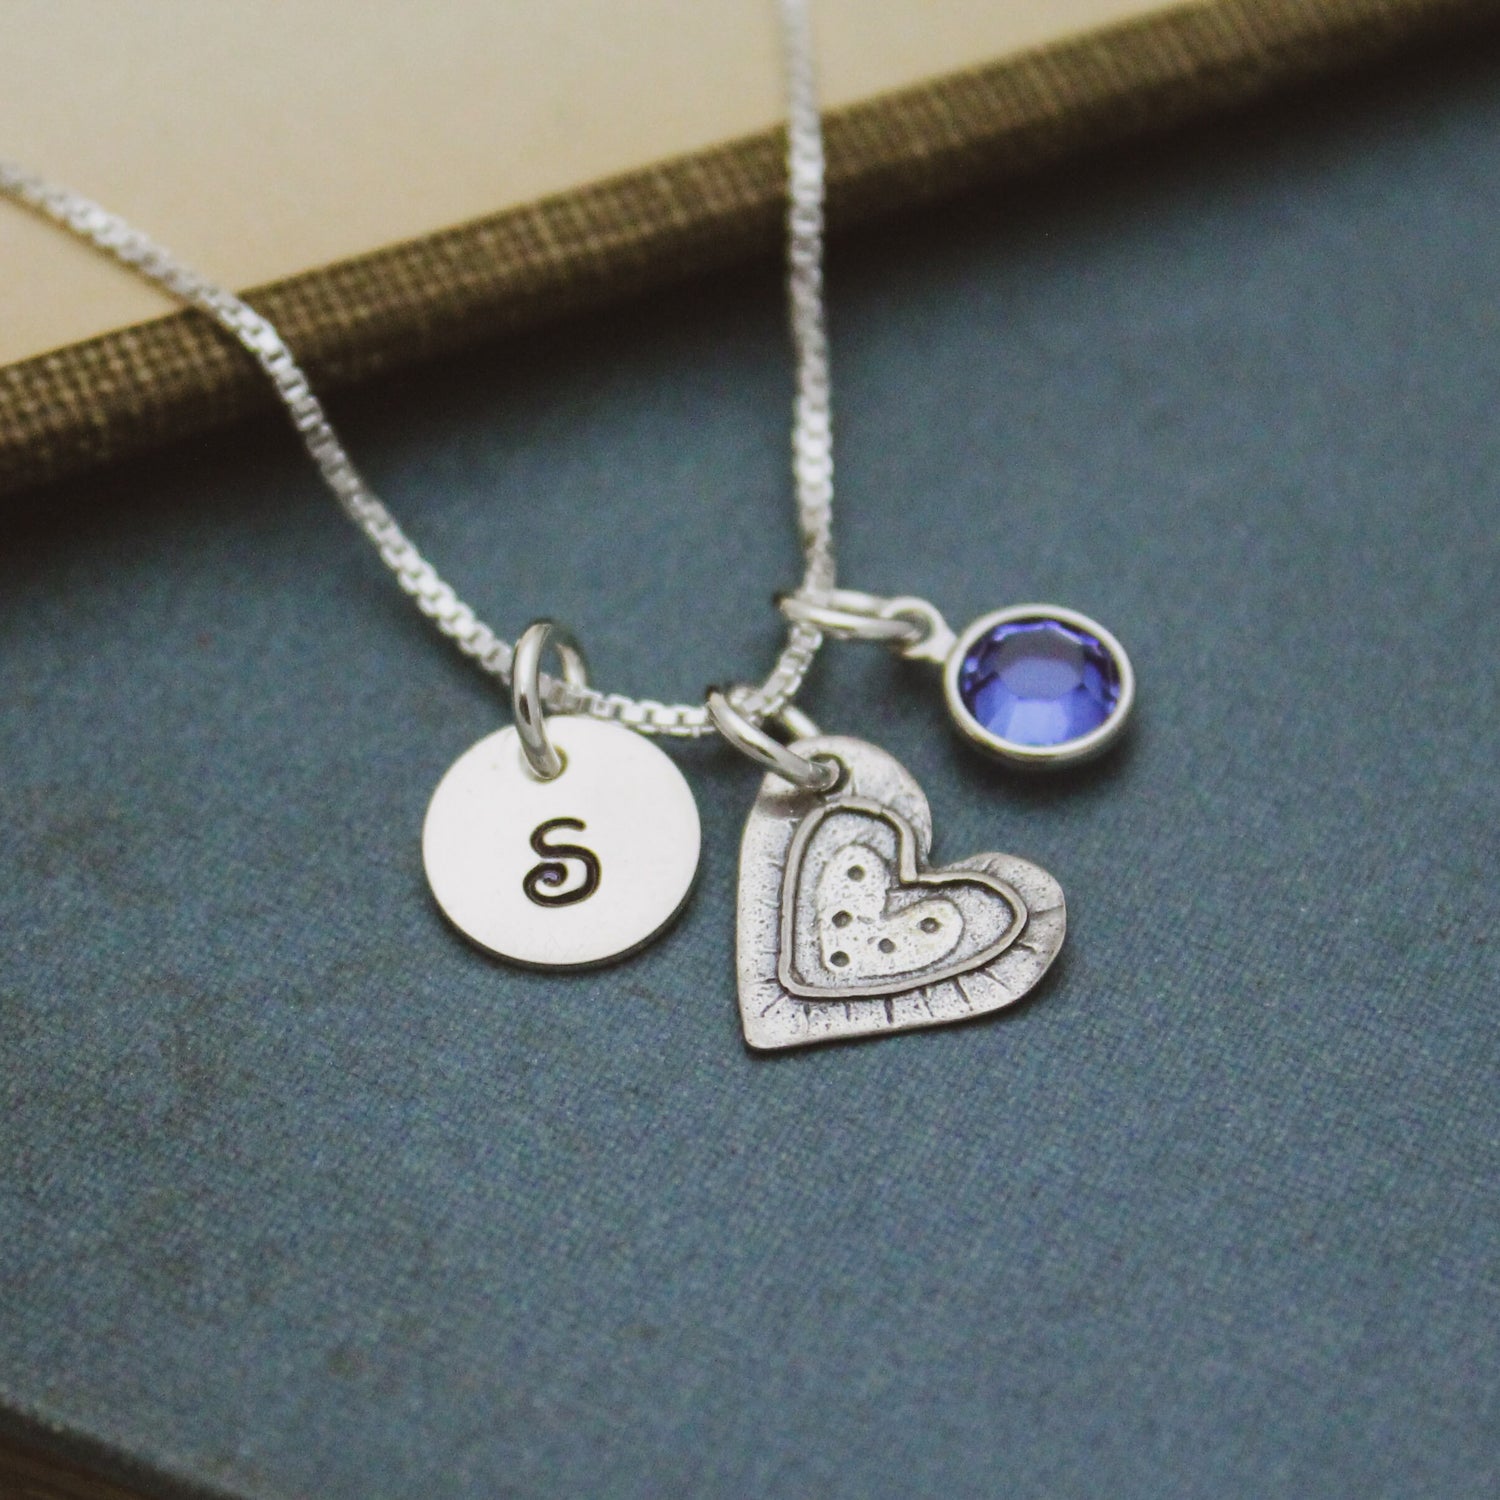 Cute September Birthstone Initial Necklace, Sapphire Heart Jewelry, September Birthday Gift, September Birthstone Jewelry, Sterling Silver